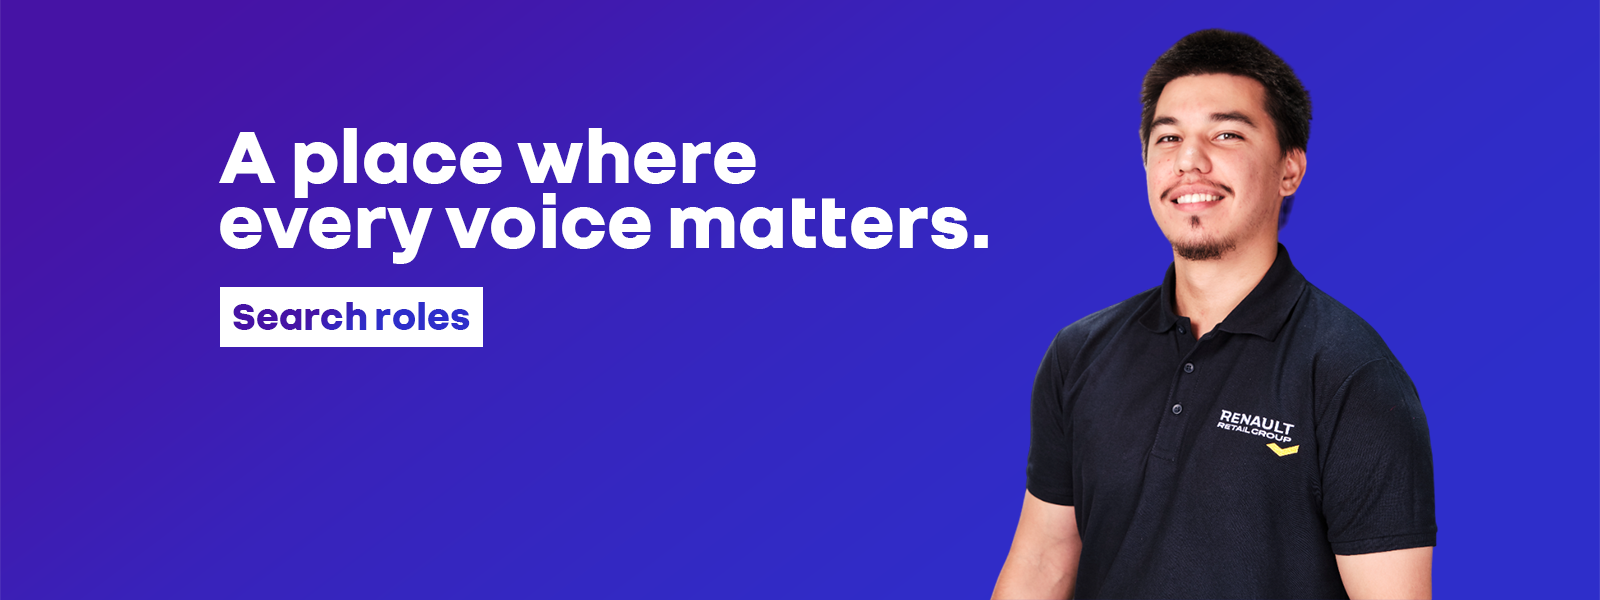 A place where every voice matters